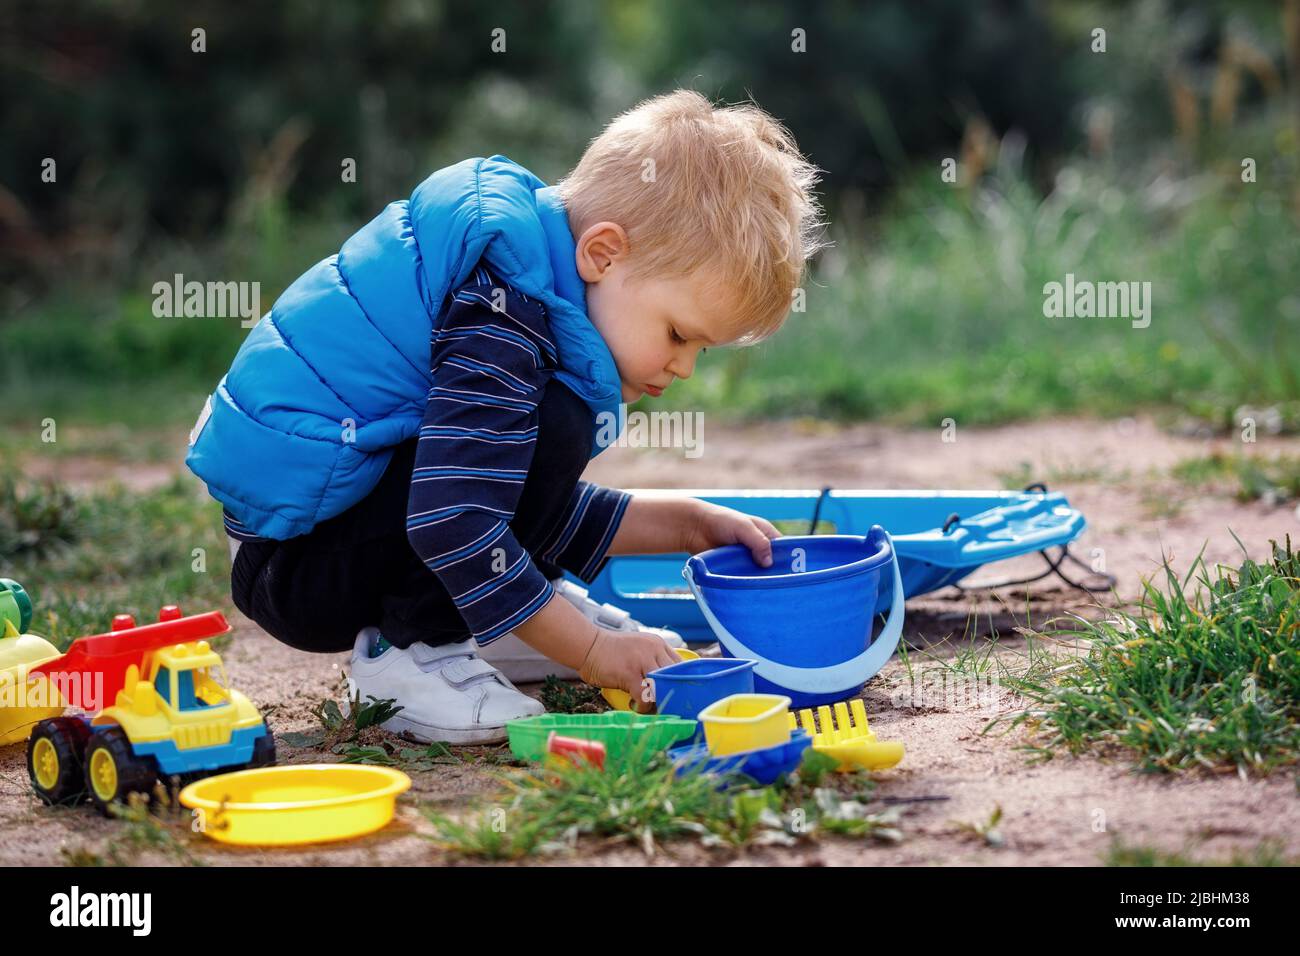 Child squat on the ground playing with sand toys. The child digs the sand into a plastic bucket. Summer outdoor activity for kids. Leisure Time. Stock Photo